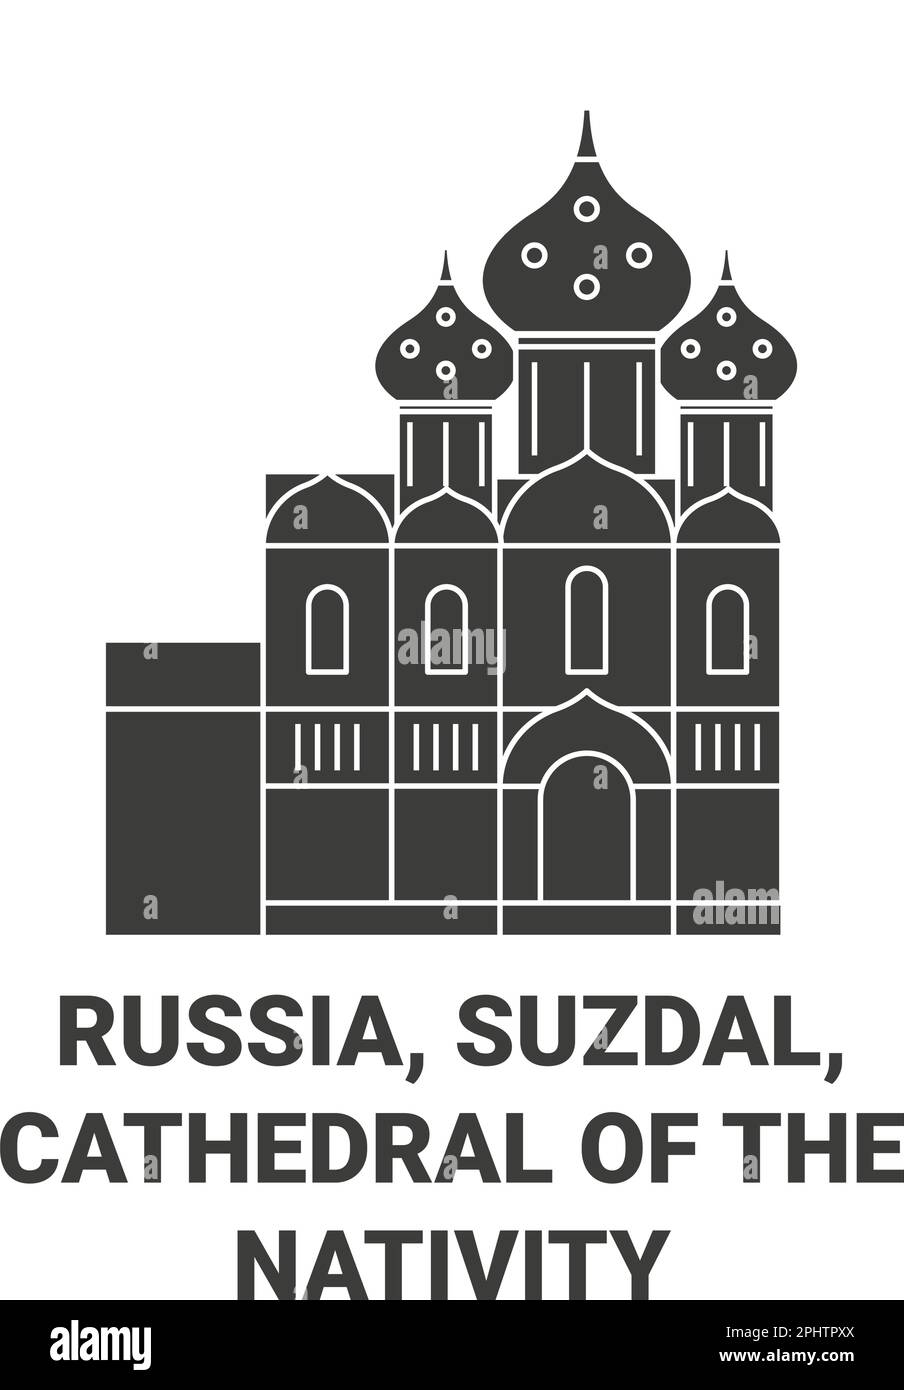 Russia, Suzdal, Cathedral Of The Nativity travel landmark vector illustration Stock Vector